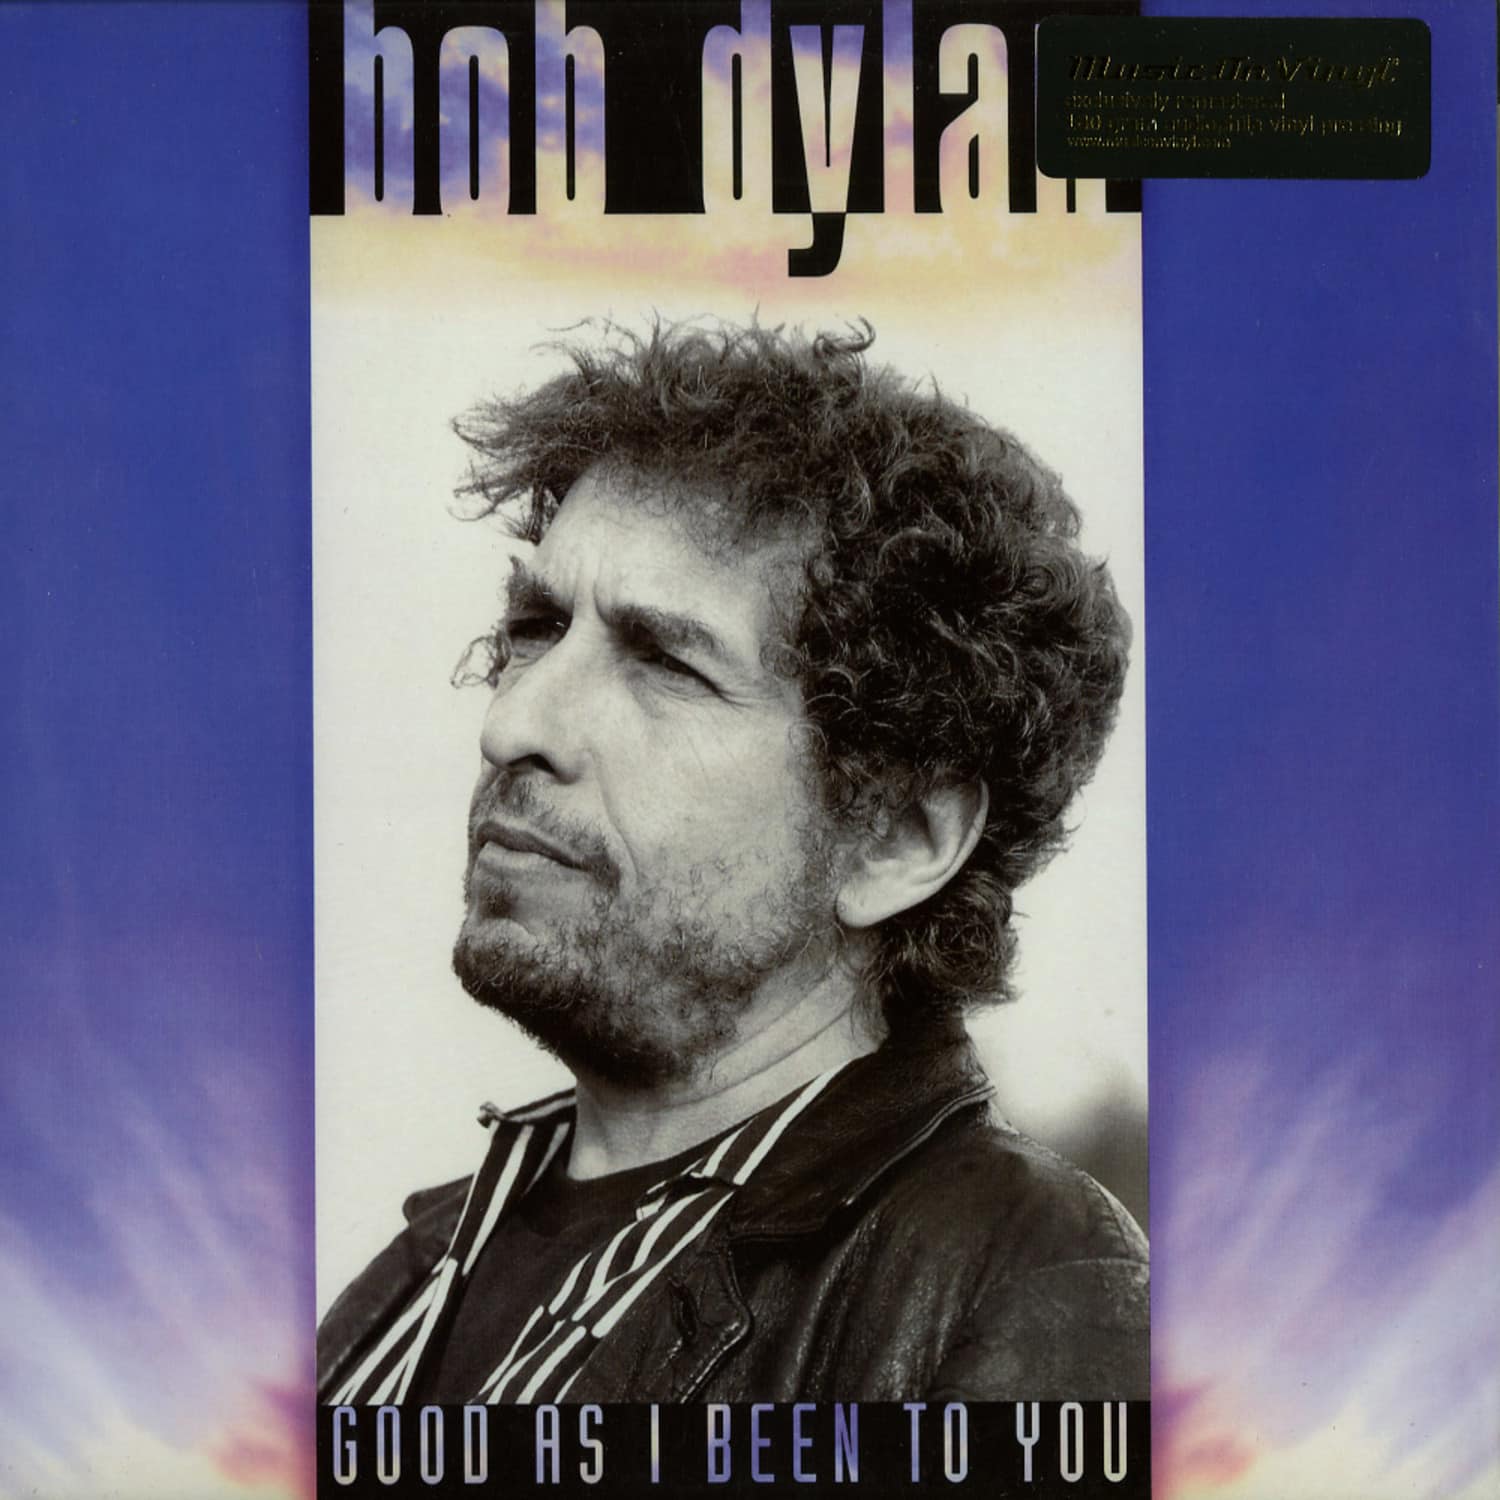 Bob Dylan - GOOD AS I BEEN TO YOU 